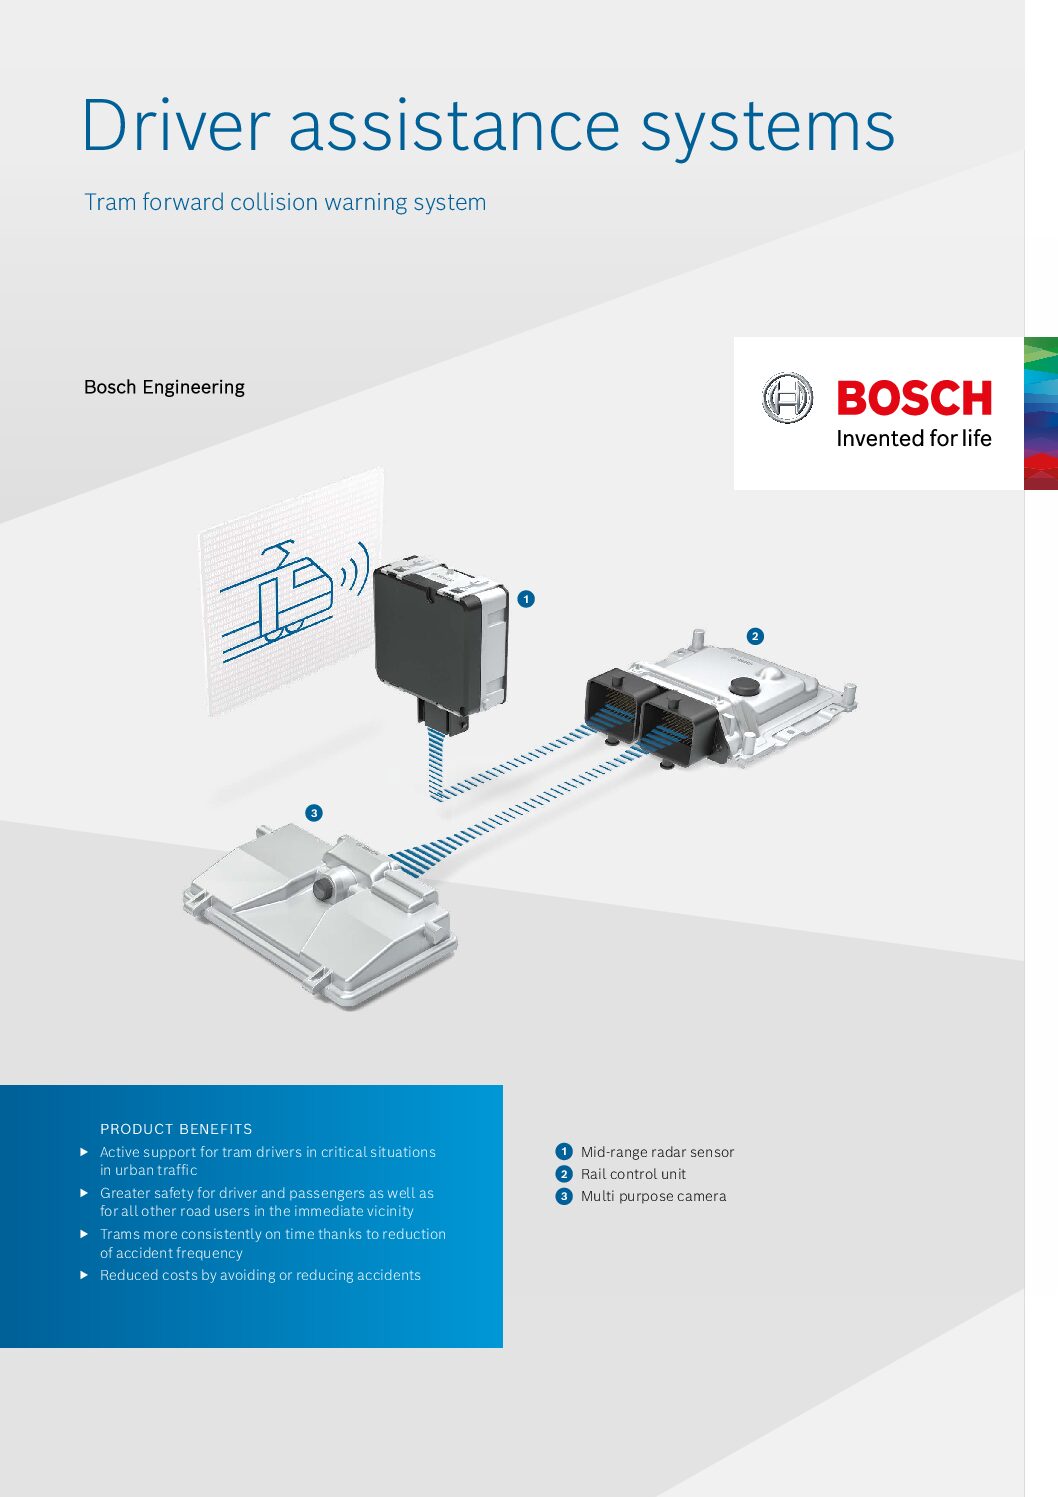 Bosch Engineering GmbH: Driver Assistance Systems